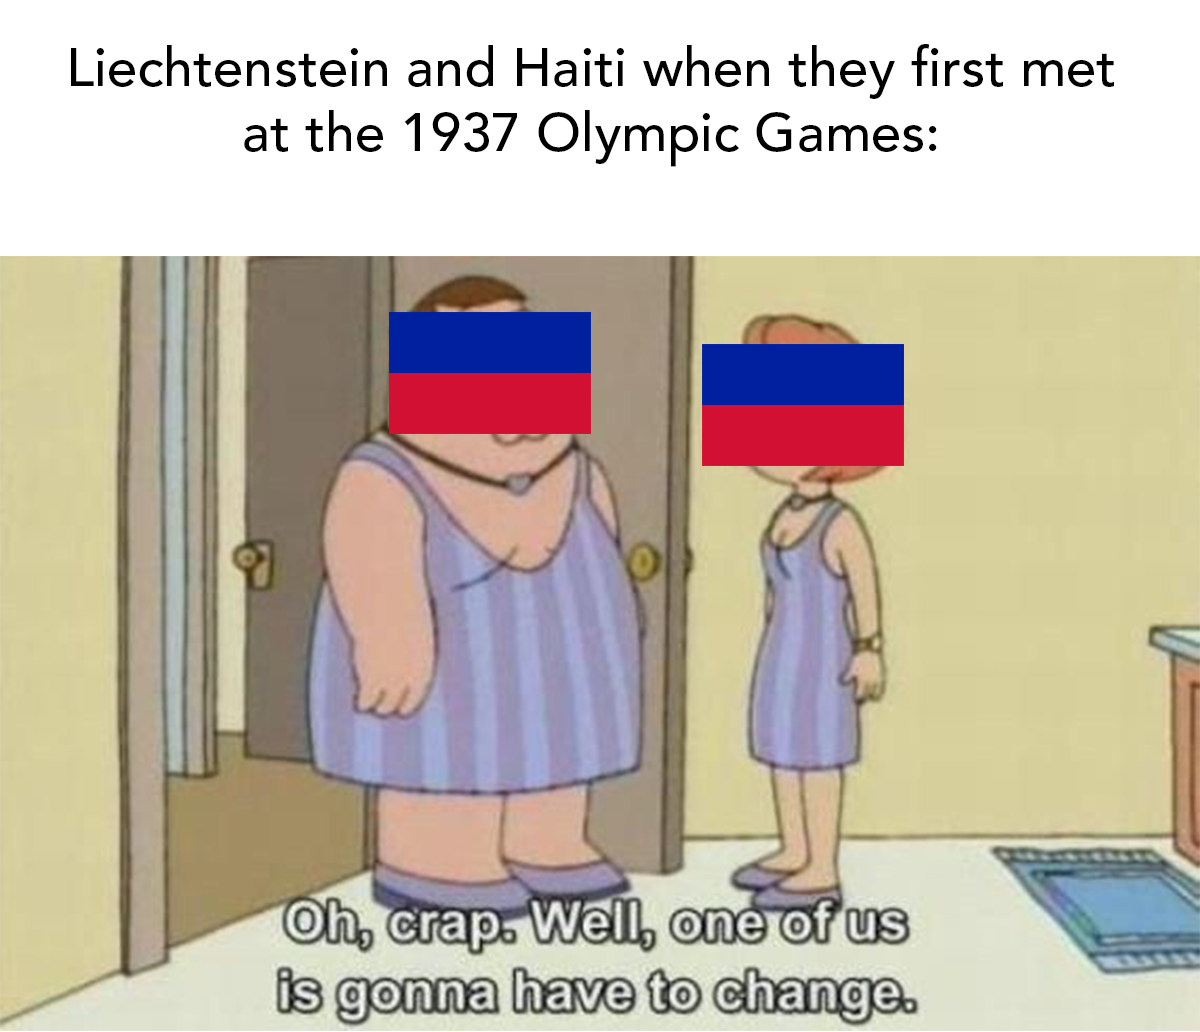 family guy one of us has to change meme - Liechtenstein and Haiti when they first met at the 1937 Olympic Games Oh, crap. Well, one of us is gonna have to change.